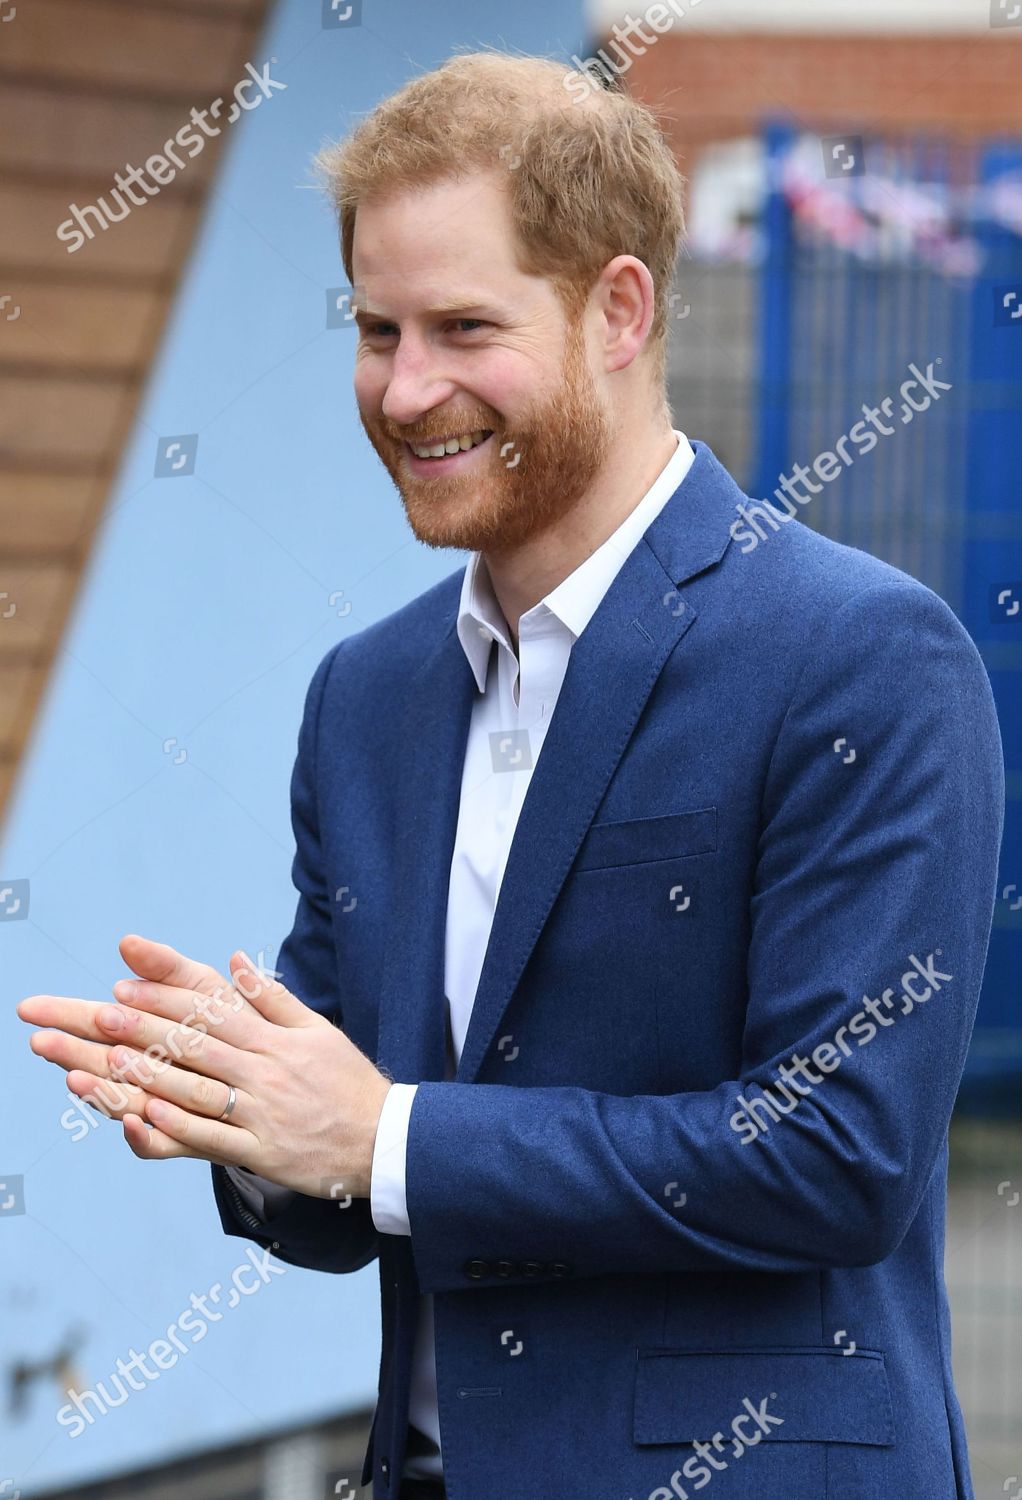 prince-harry-visits-st-vincents-catholic-primary-school-for-commonwealth-canopy-and-woodland-trust-tree-planting-ceremony-london-uk-shutterstock-editorial-10160984az.jpg